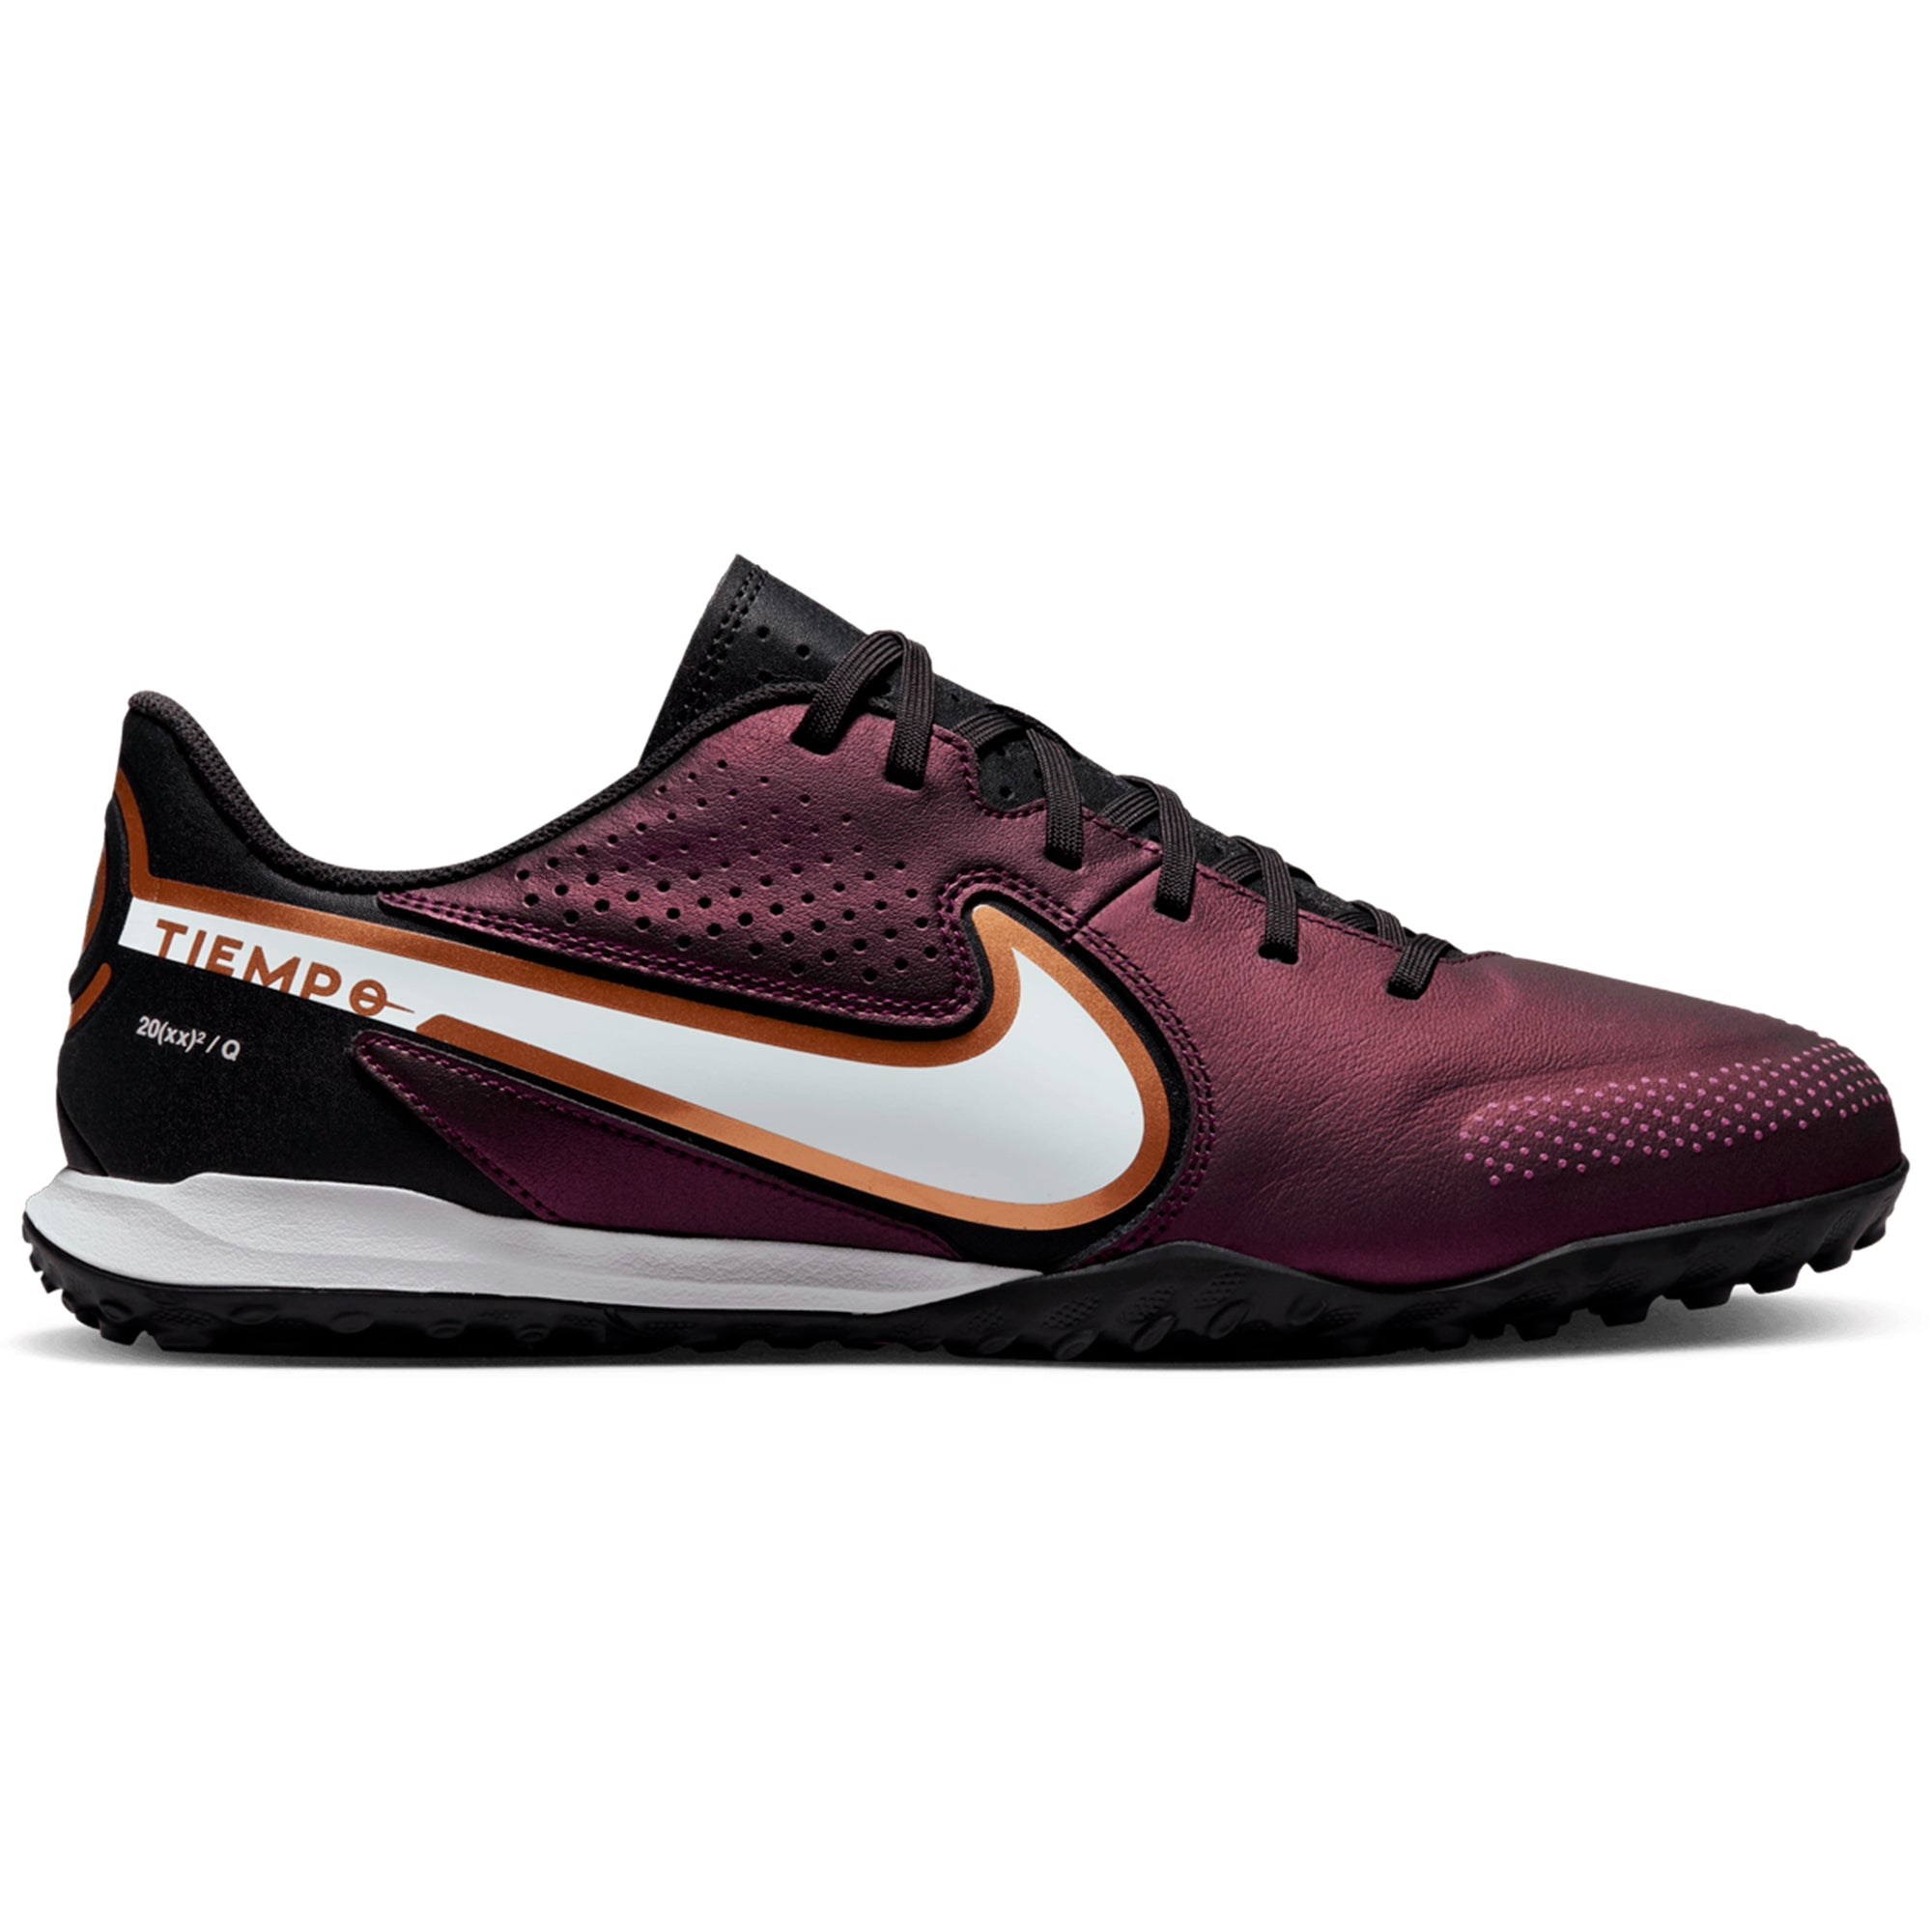 Nike Tiempo Legend 9 Academy TF Artificial Turf Soccer Shoe - Space Purple/White DR5985-510 Zone